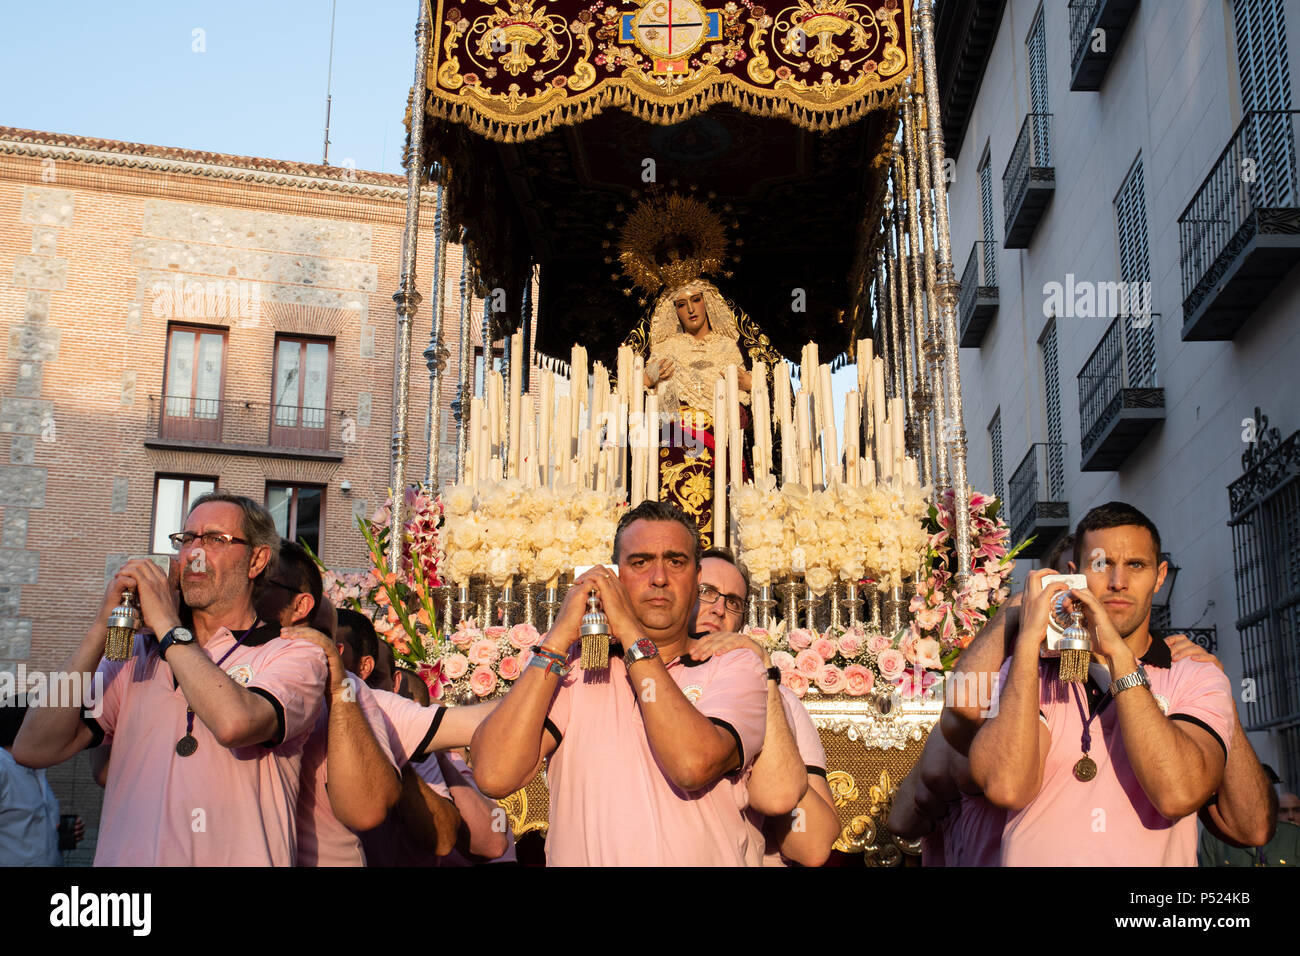 Madrid, Spain. 23rd June, 2018. Members of the brotherhood carrying the 'paso' of the Virgin 'Maria Santisima del Dulce Nombre en su Soledad' during sunset. © Valentin Sama-Rojo/Alamy Live News. Stock Photo